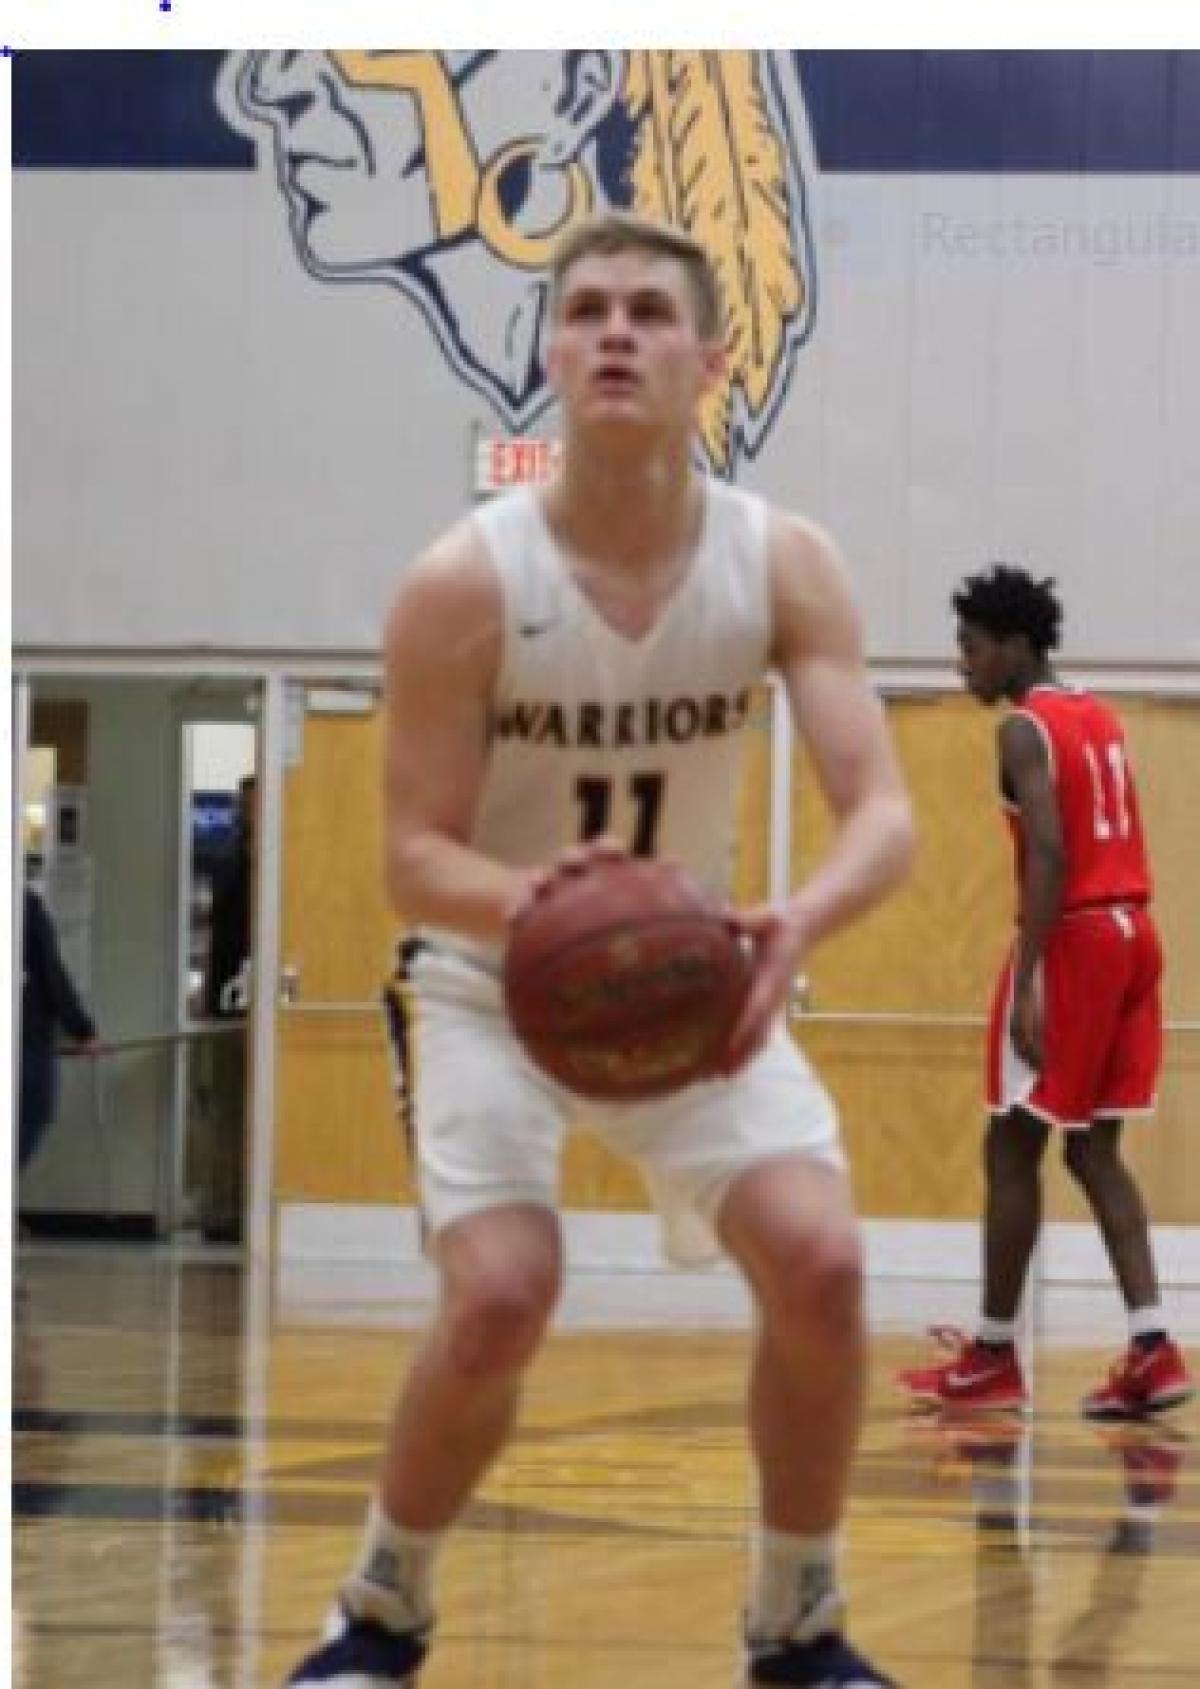 CONGRATULATIONS Brent Hoffmann for being selected to be on the 2020 WBCS All-Star Basketball Team